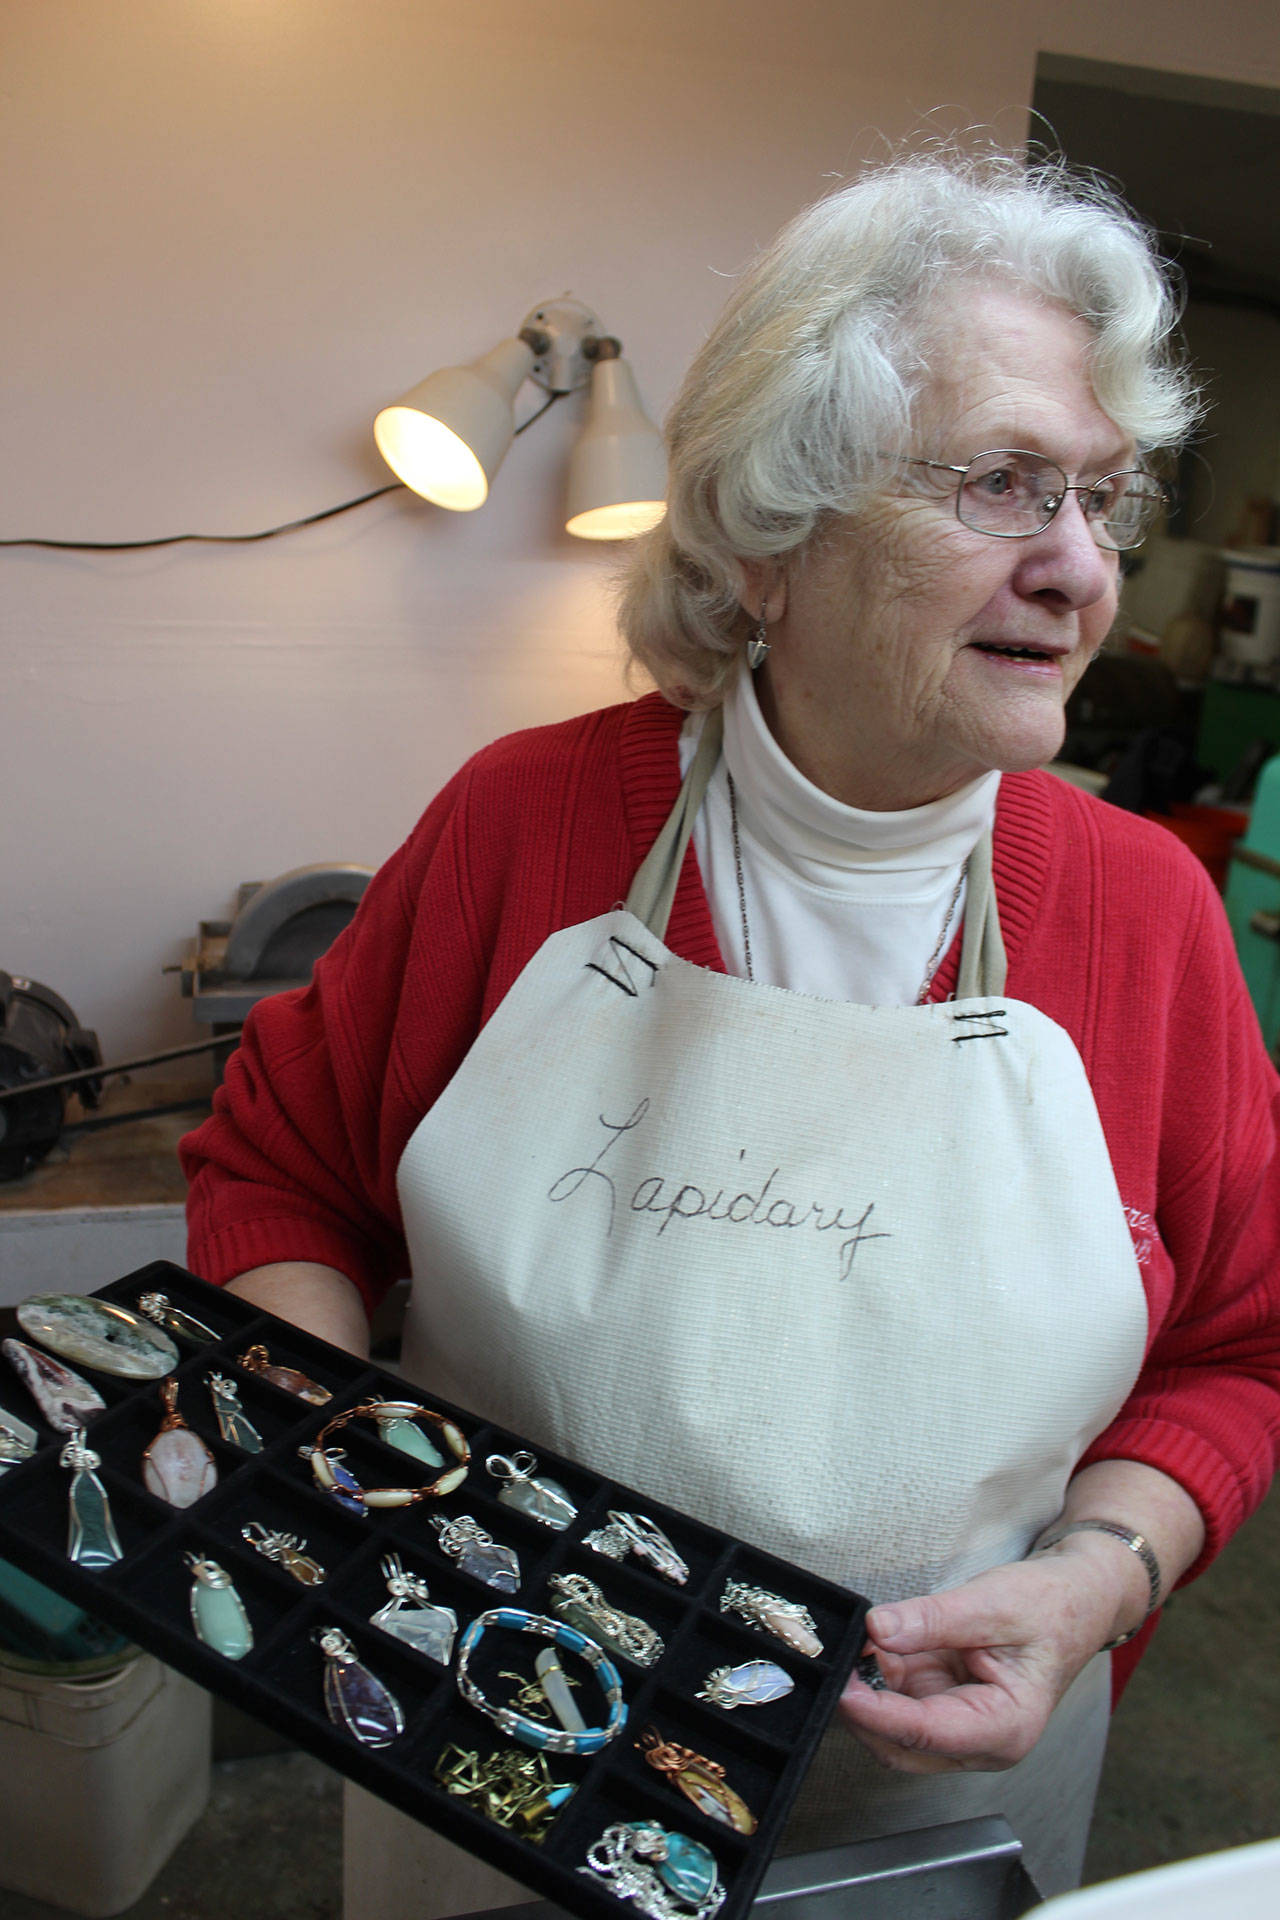 Pat Watt joined the Whidbey Island Gem Club at a friend’s suggestion three years ago. She quickly learned how to cut and shape stone into colorful pieces of jewelry. Photo by Patricia Guthrie/Whidbey News-Times